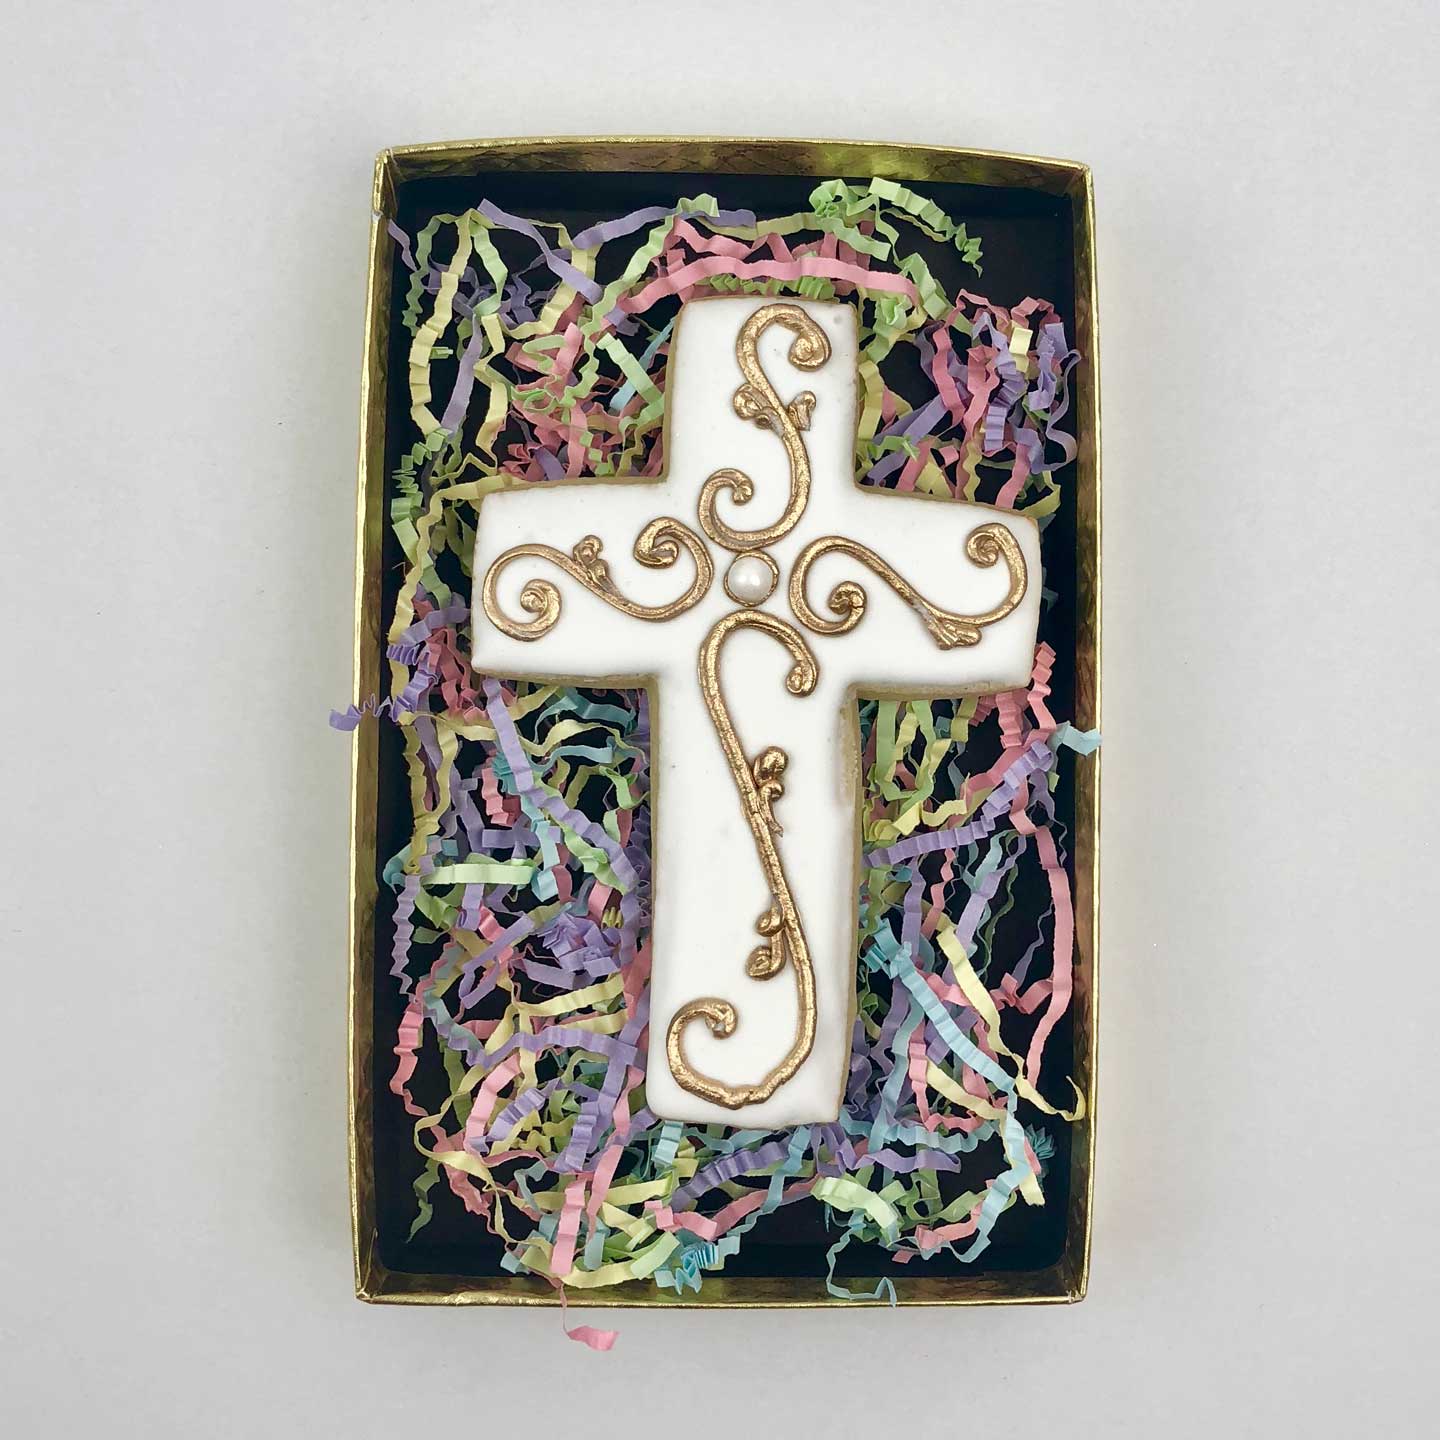 Decorated white Cross Cookie in a box